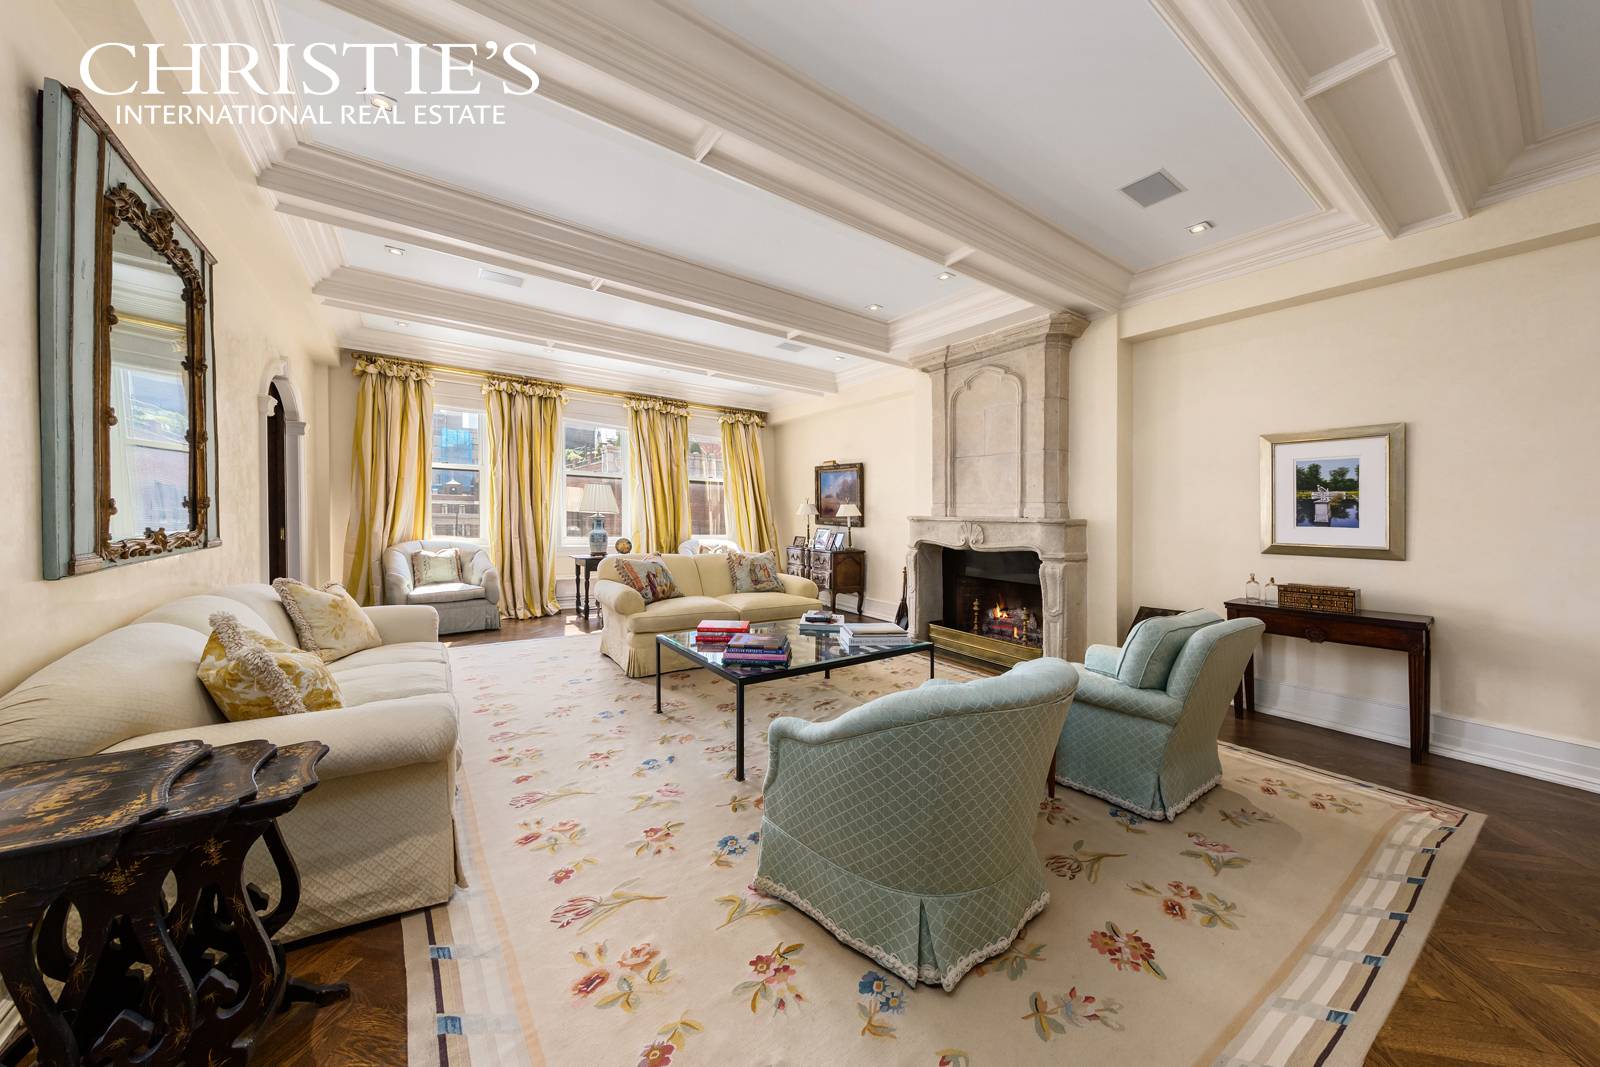 Welcome to Penthouse C, a stunning pre war duplex on the Upper East Side.